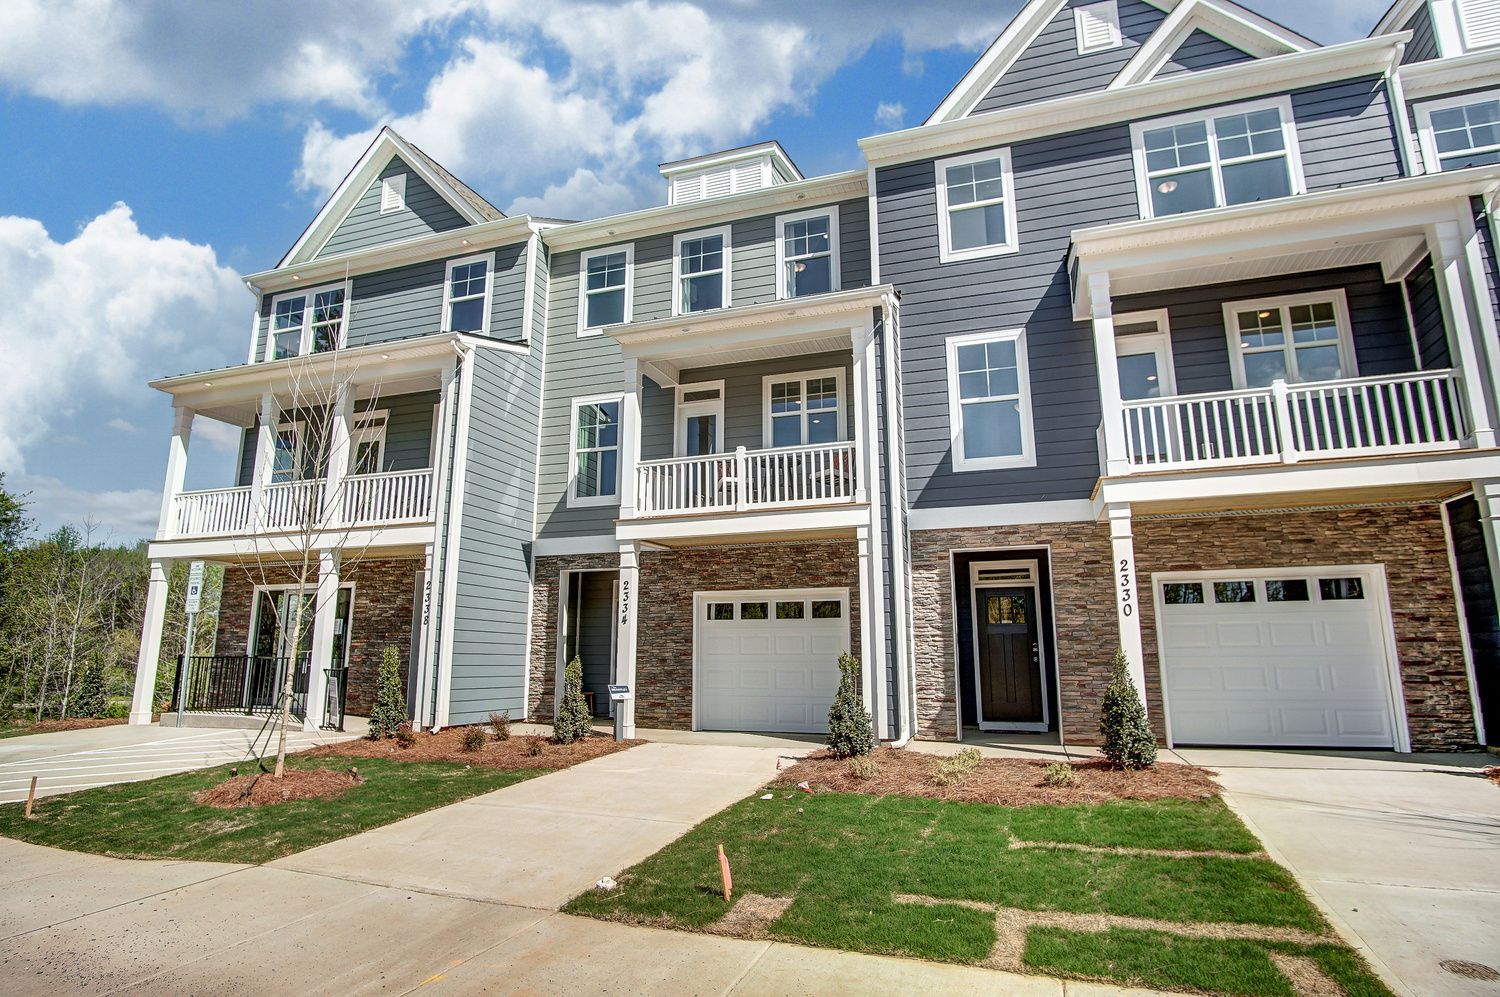 Glenmere Townhomes